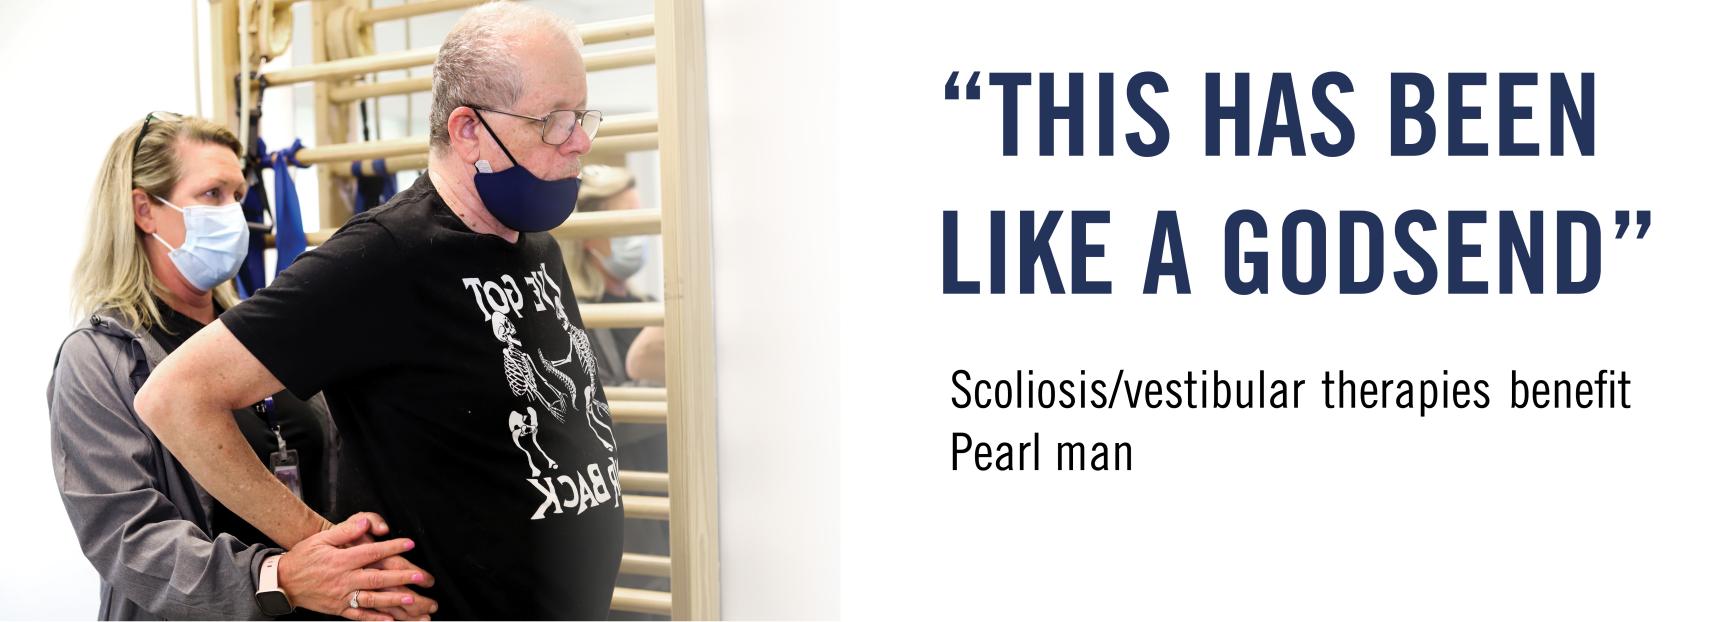 'This has been like a godsend' Scoliosis/vestibular therapy benefits Pearl man